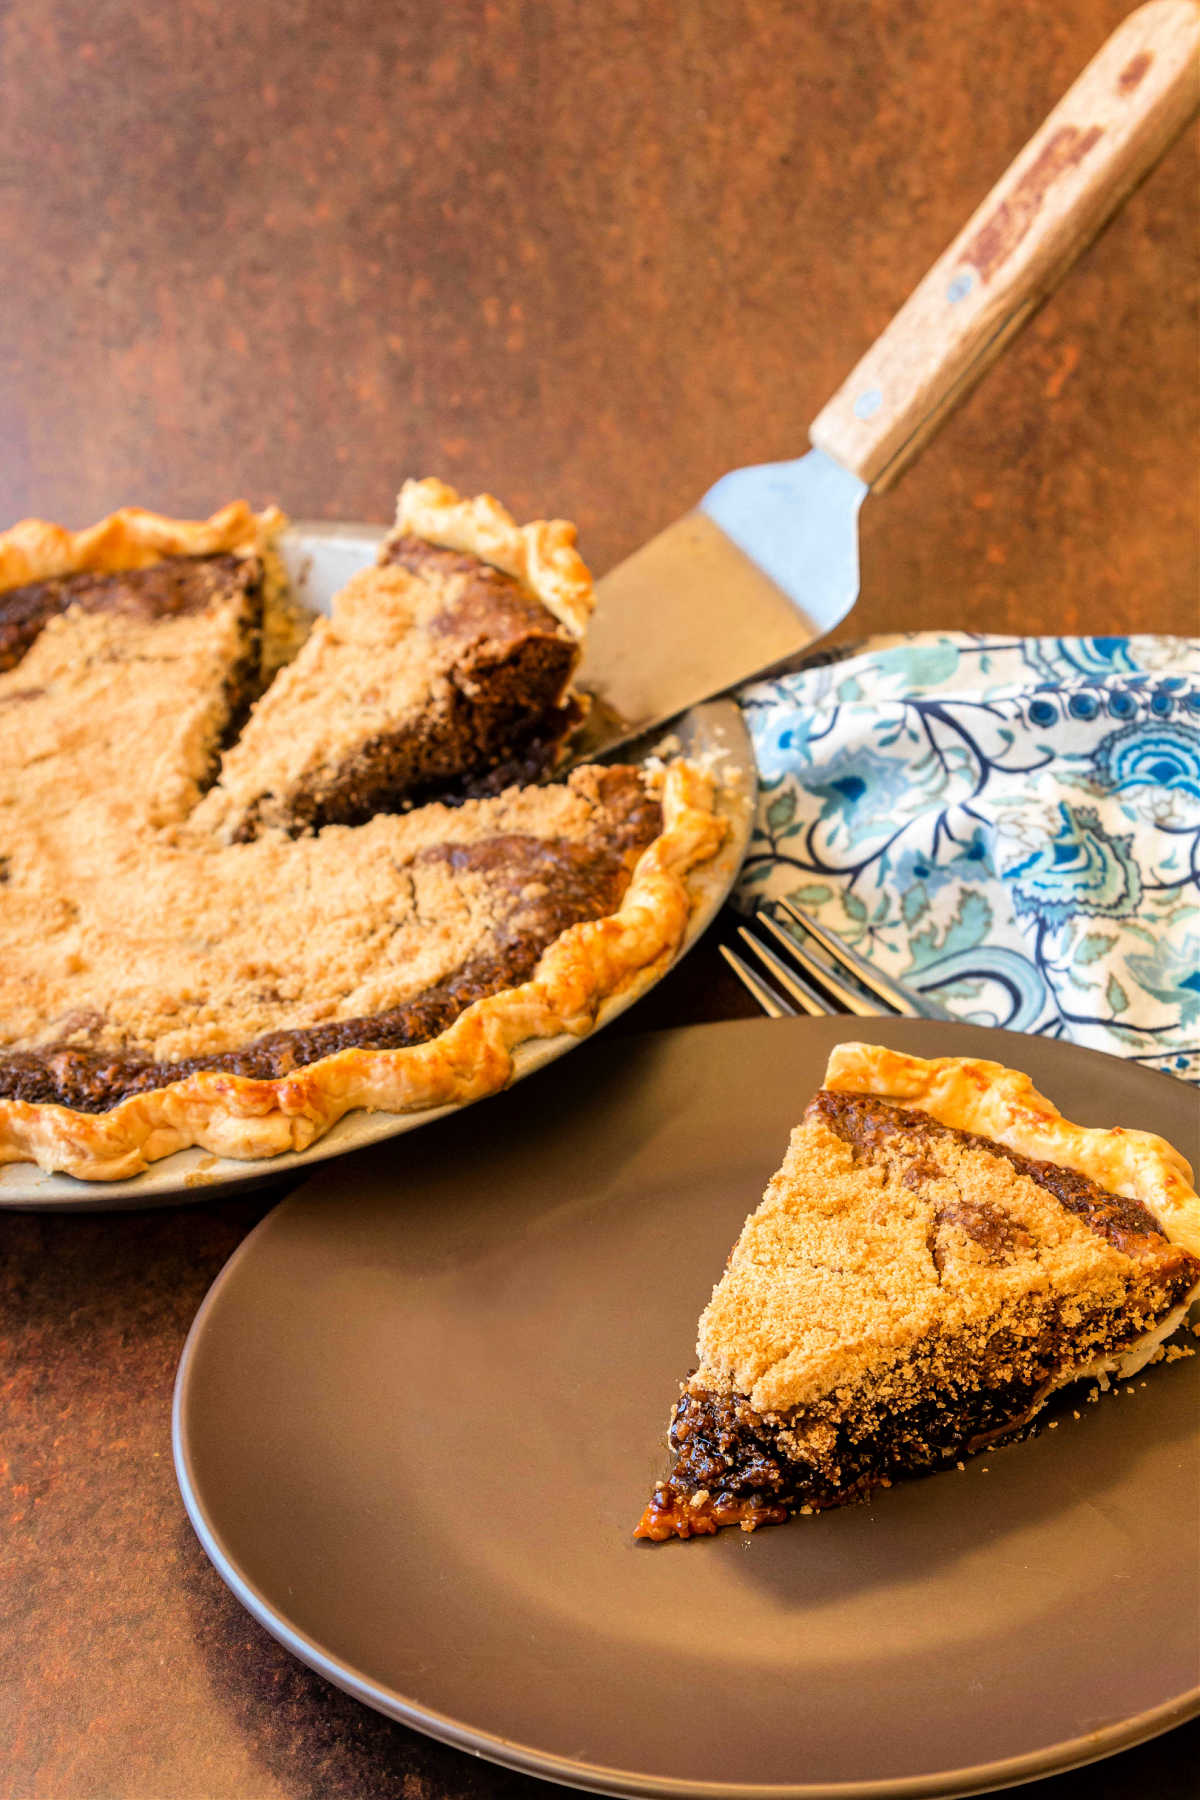 A slice of molasses pie and the whole pie behind it.